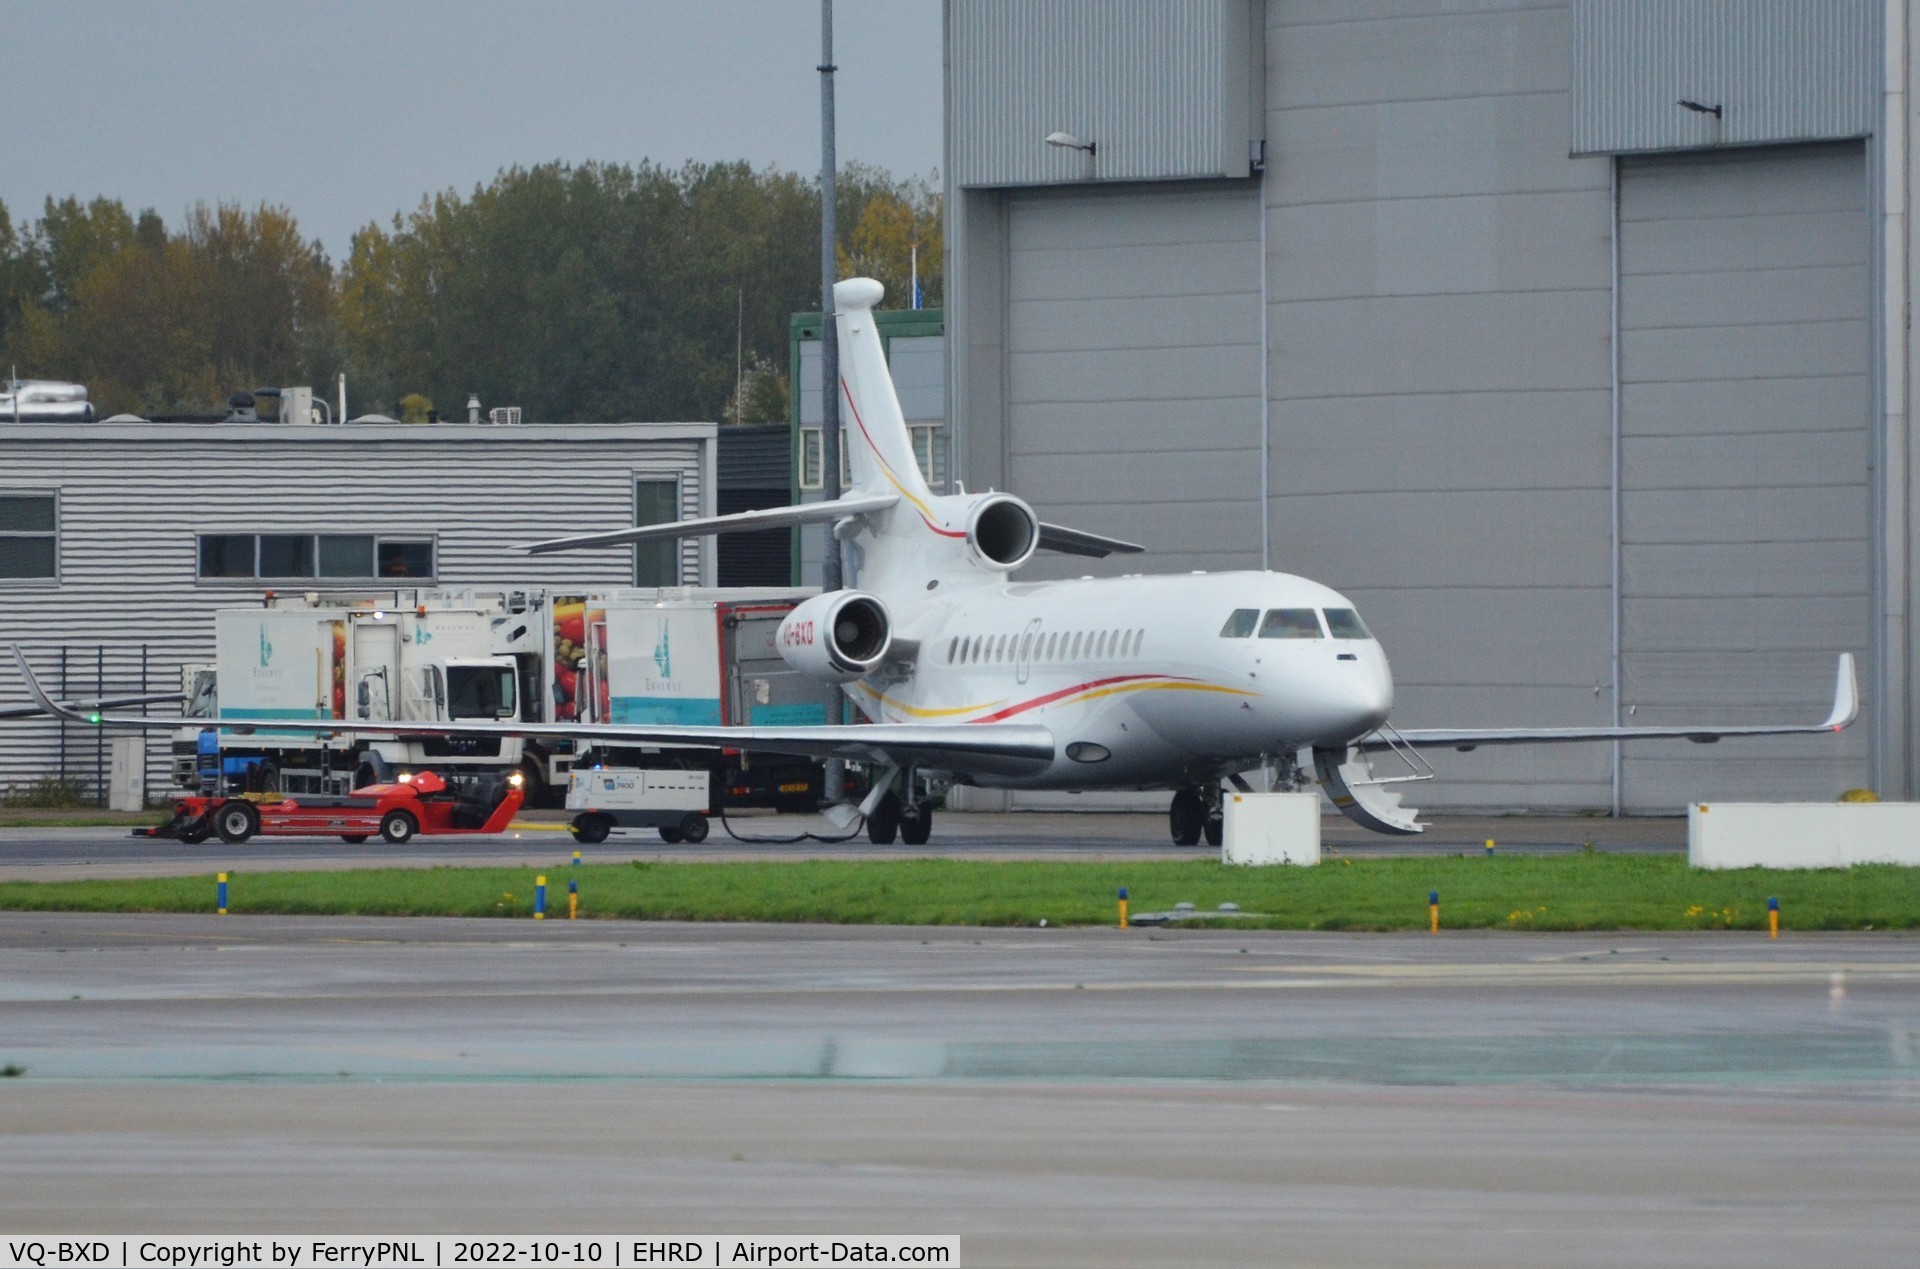 VQ-BXD, 2019 Dassault Falcon 8X C/N 449, Shell DA8X parked outside the hangar for departure shortly after.